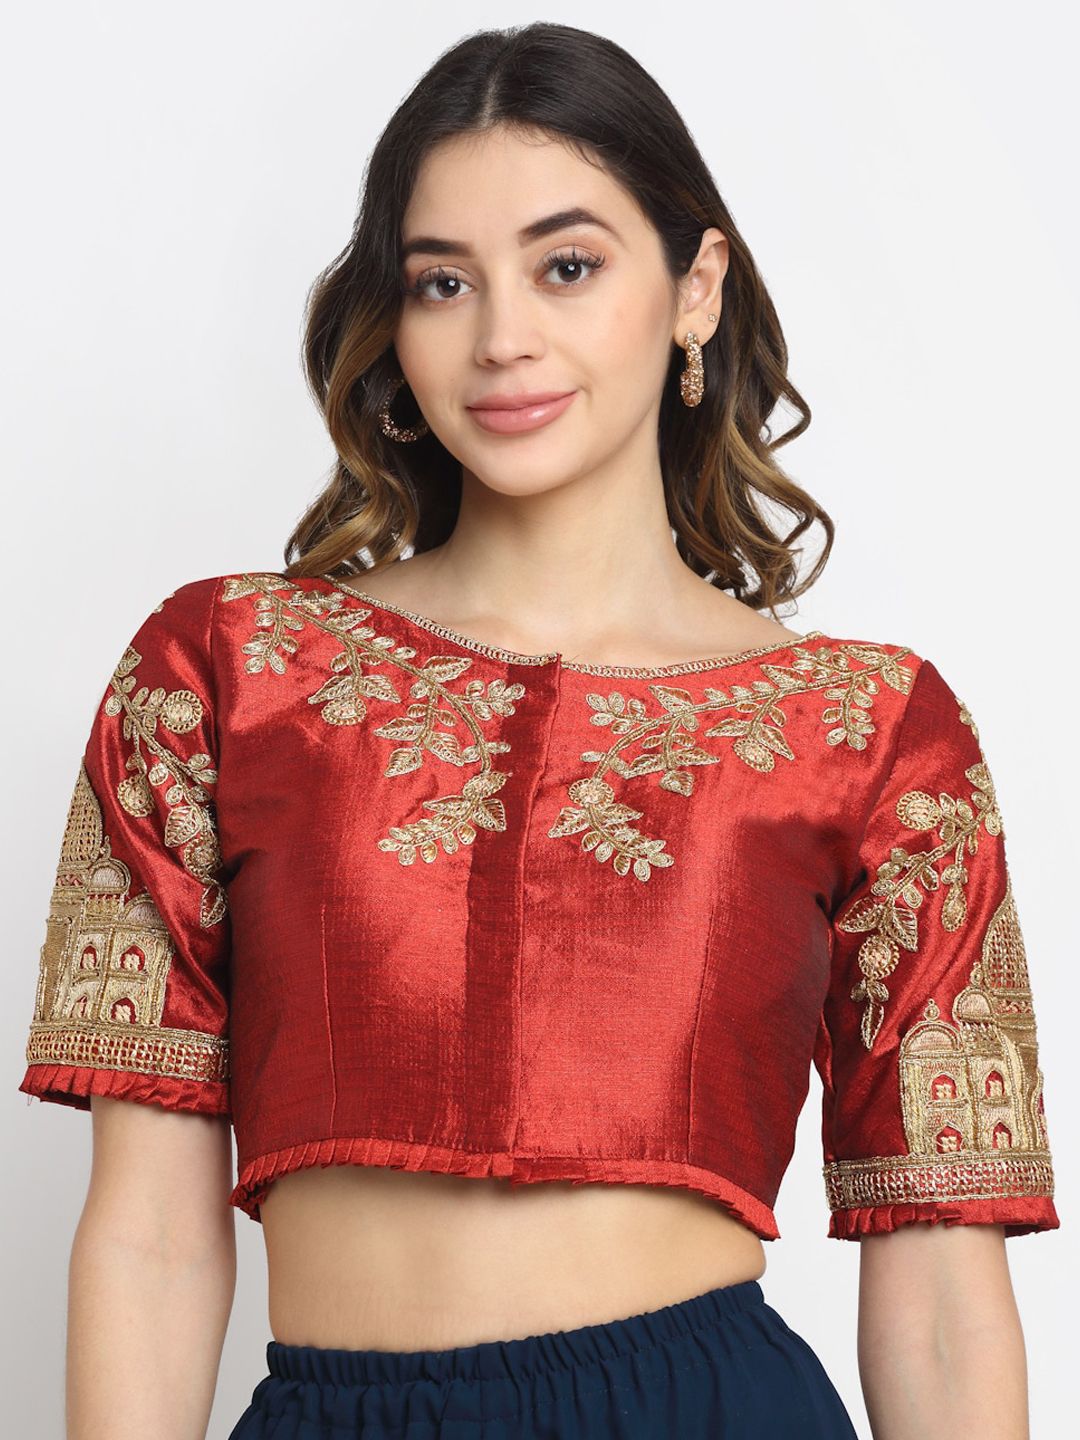 Grancy Women Maroon & Gold Embellished Saree Blouse Price in India